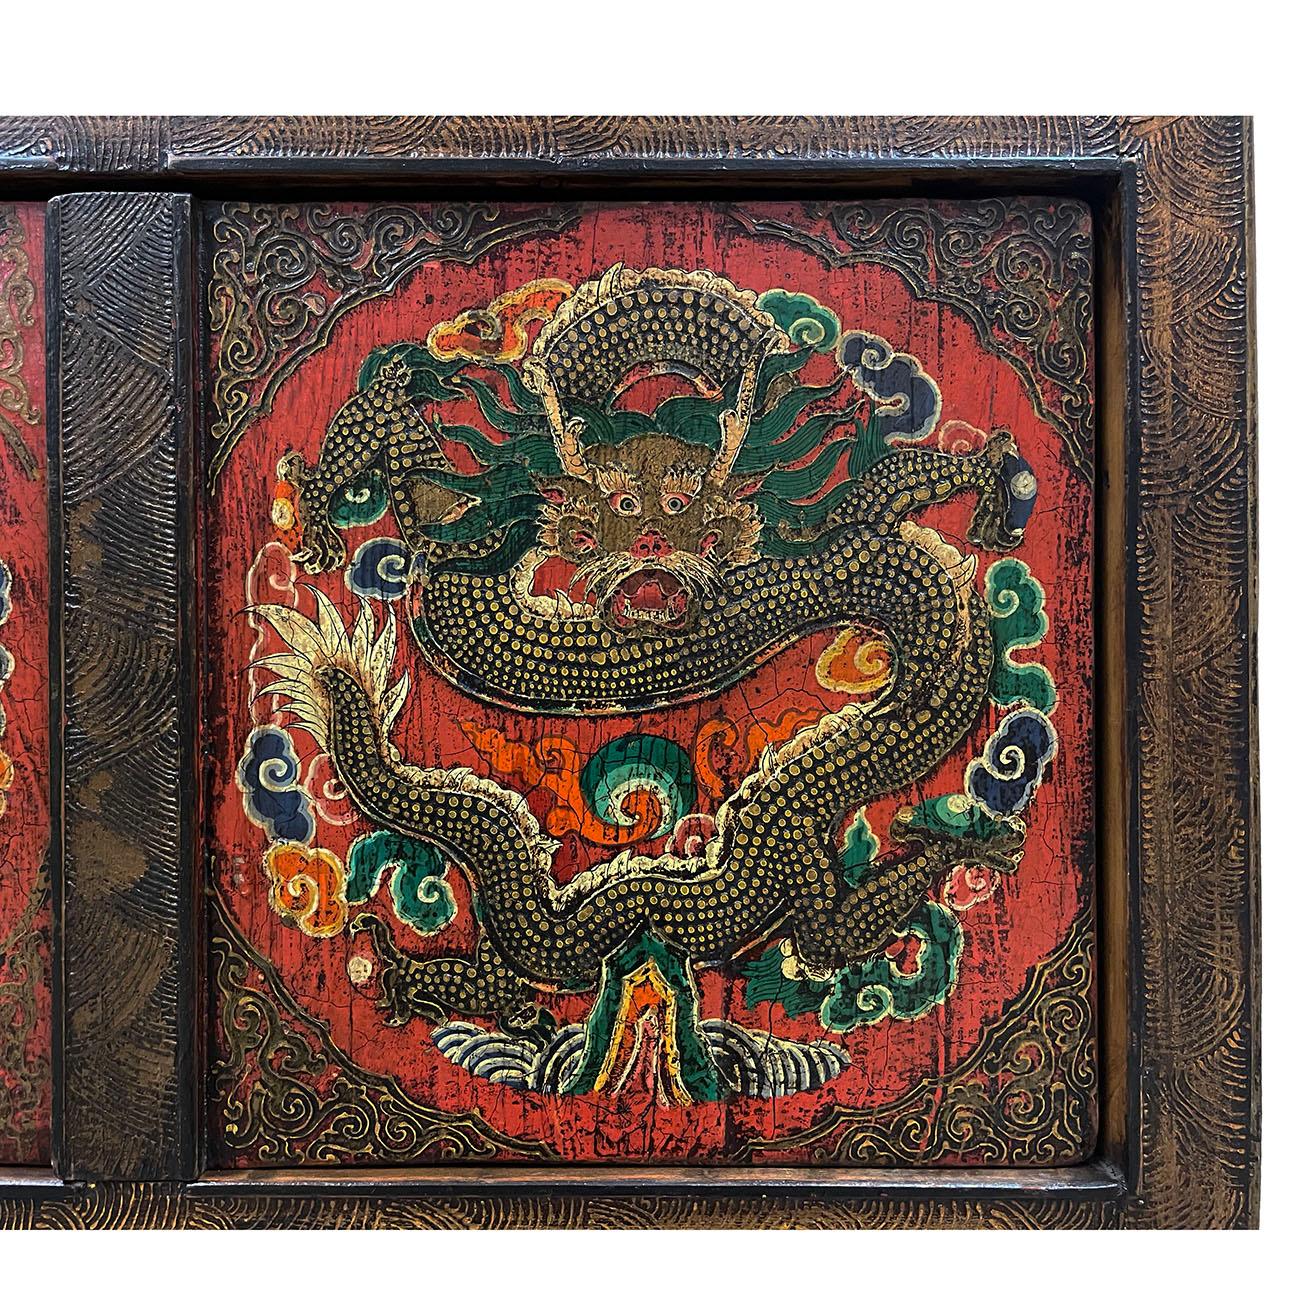 Wood Early 20th Century Antique Tibetan Painted Dragon Tall Cabinet For Sale